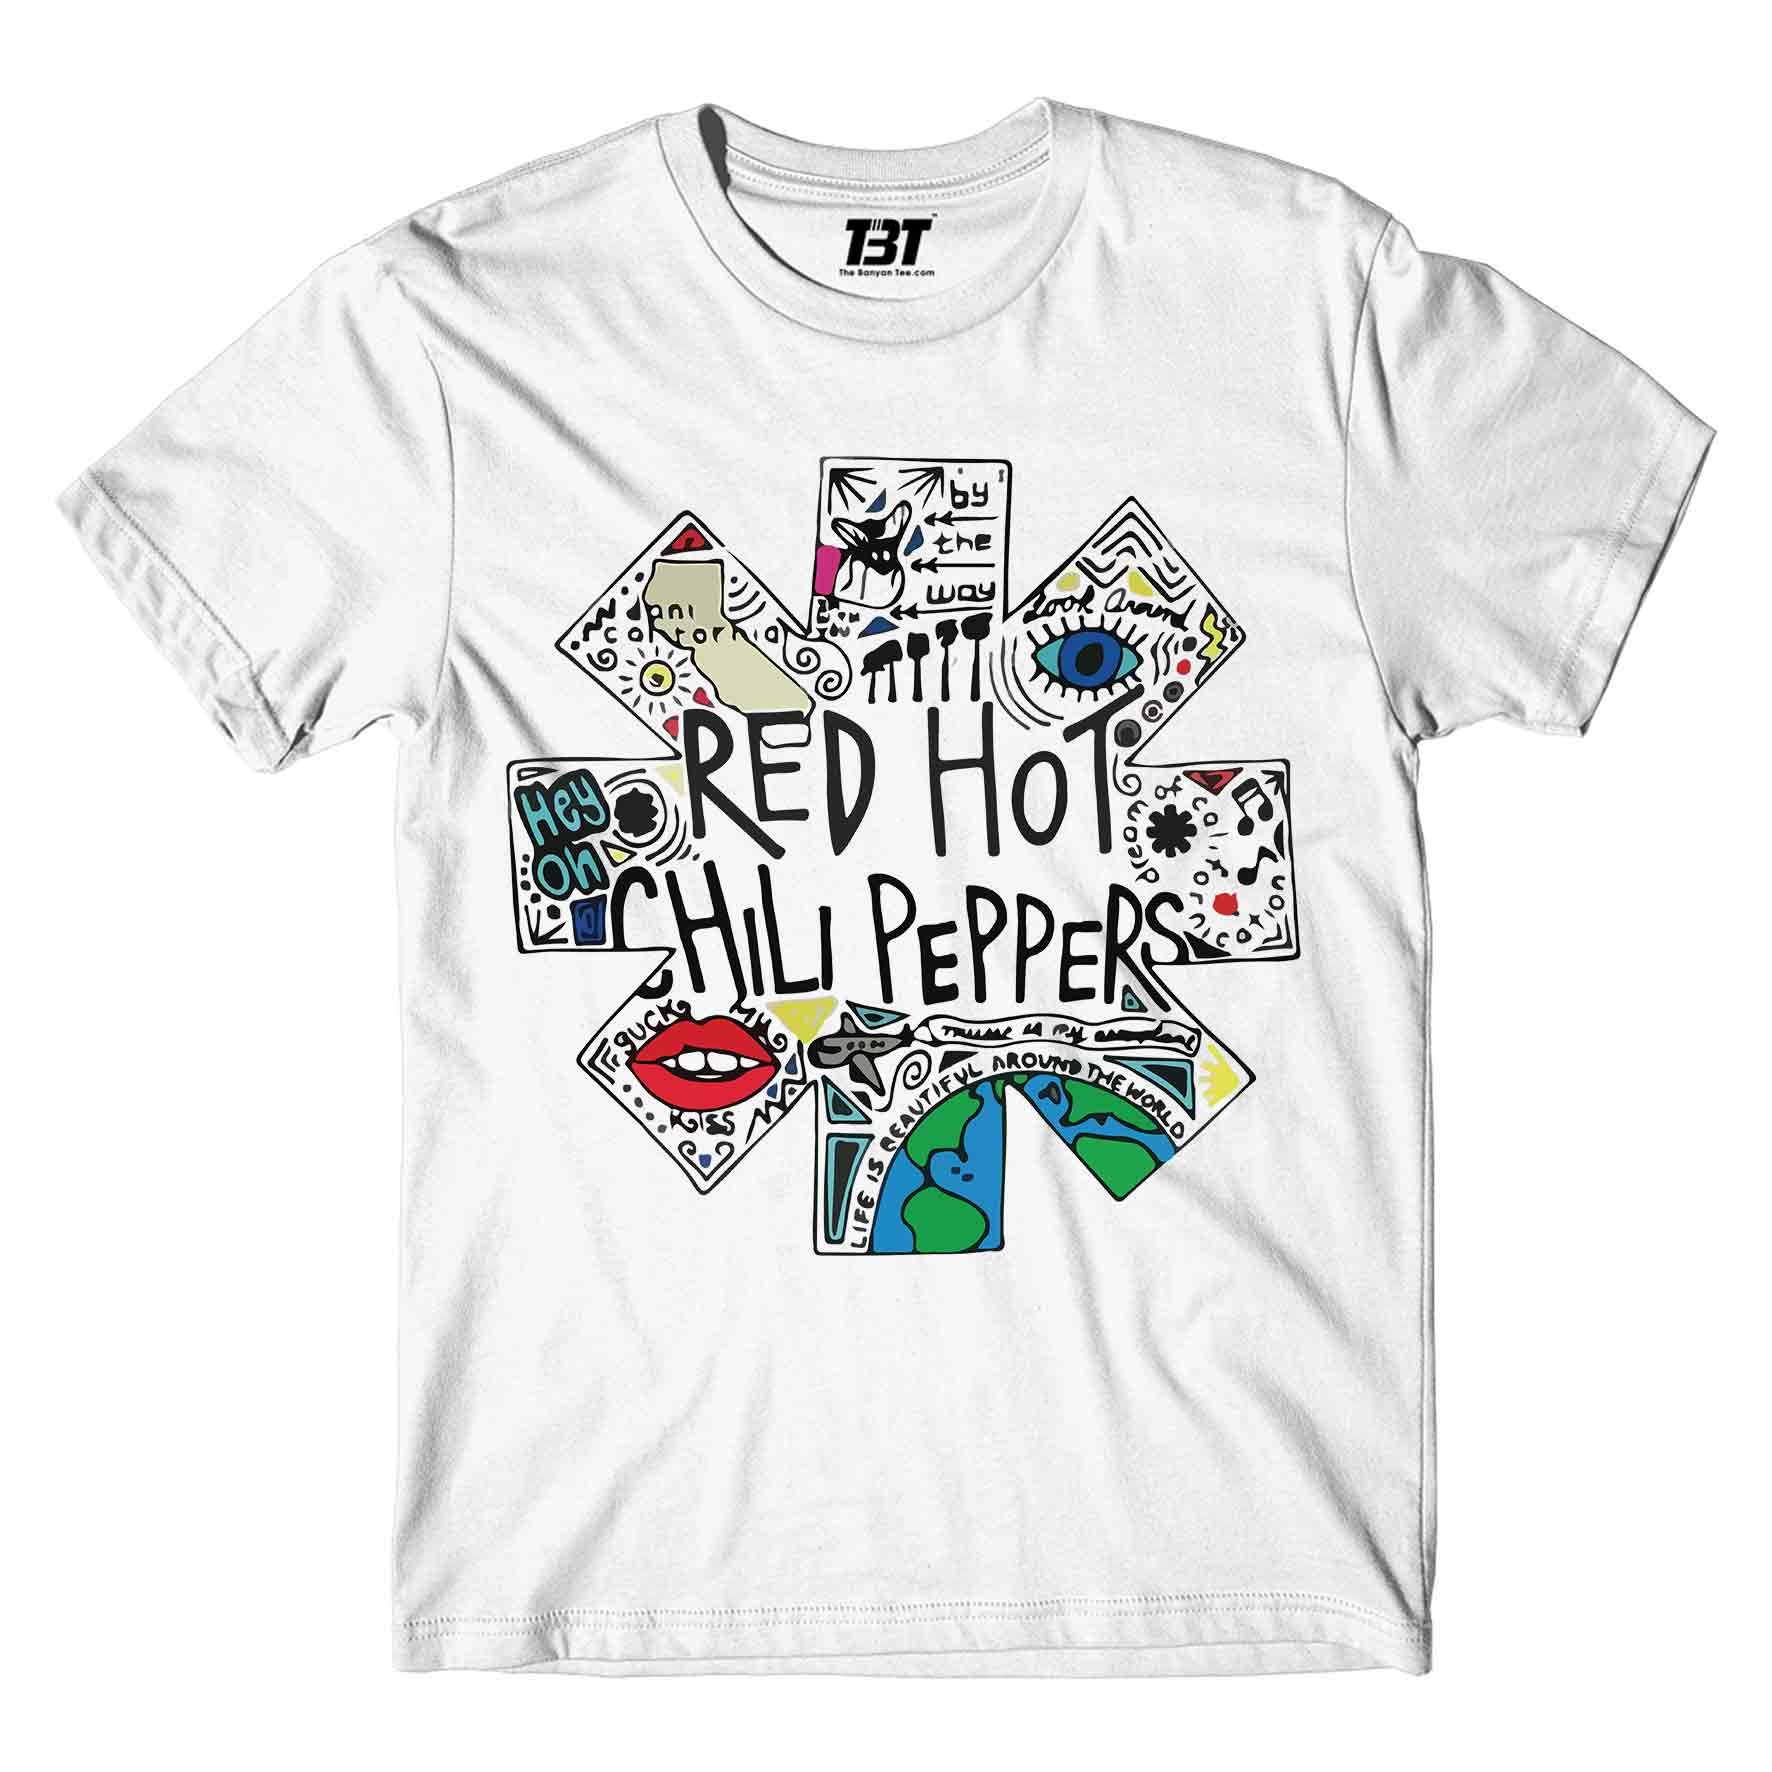 red hot chili peppers doodle t-shirt music band buy online usa united states the banyan tee tbt men women girls boys unisex white